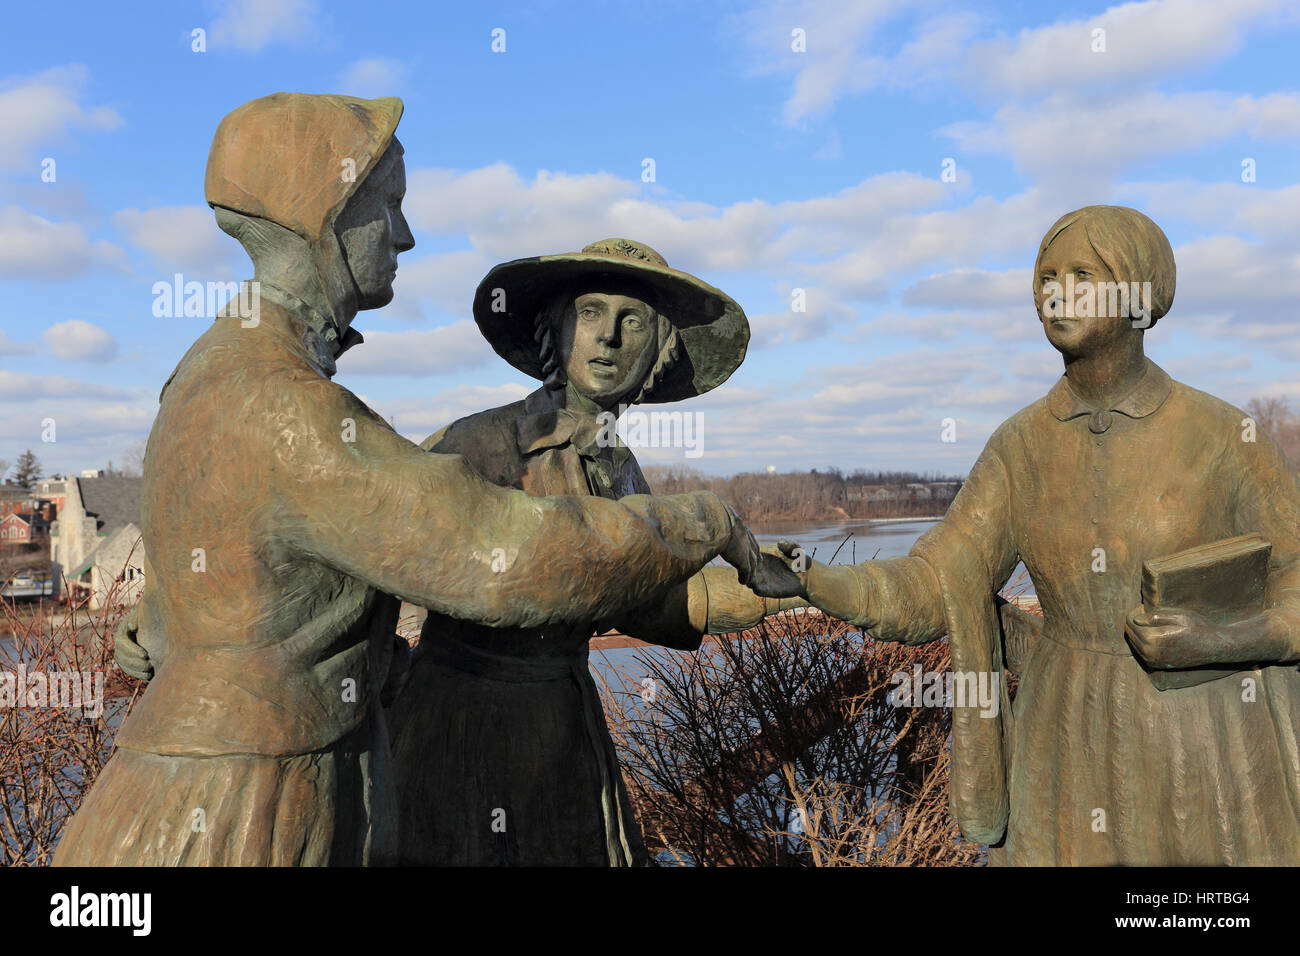 Sculpture depicting May 1851 meeting of Elizabeth Caty Stanton and Susan B. Anthony Seneca Falls New York birthplace of the women's right movement Stock Photo